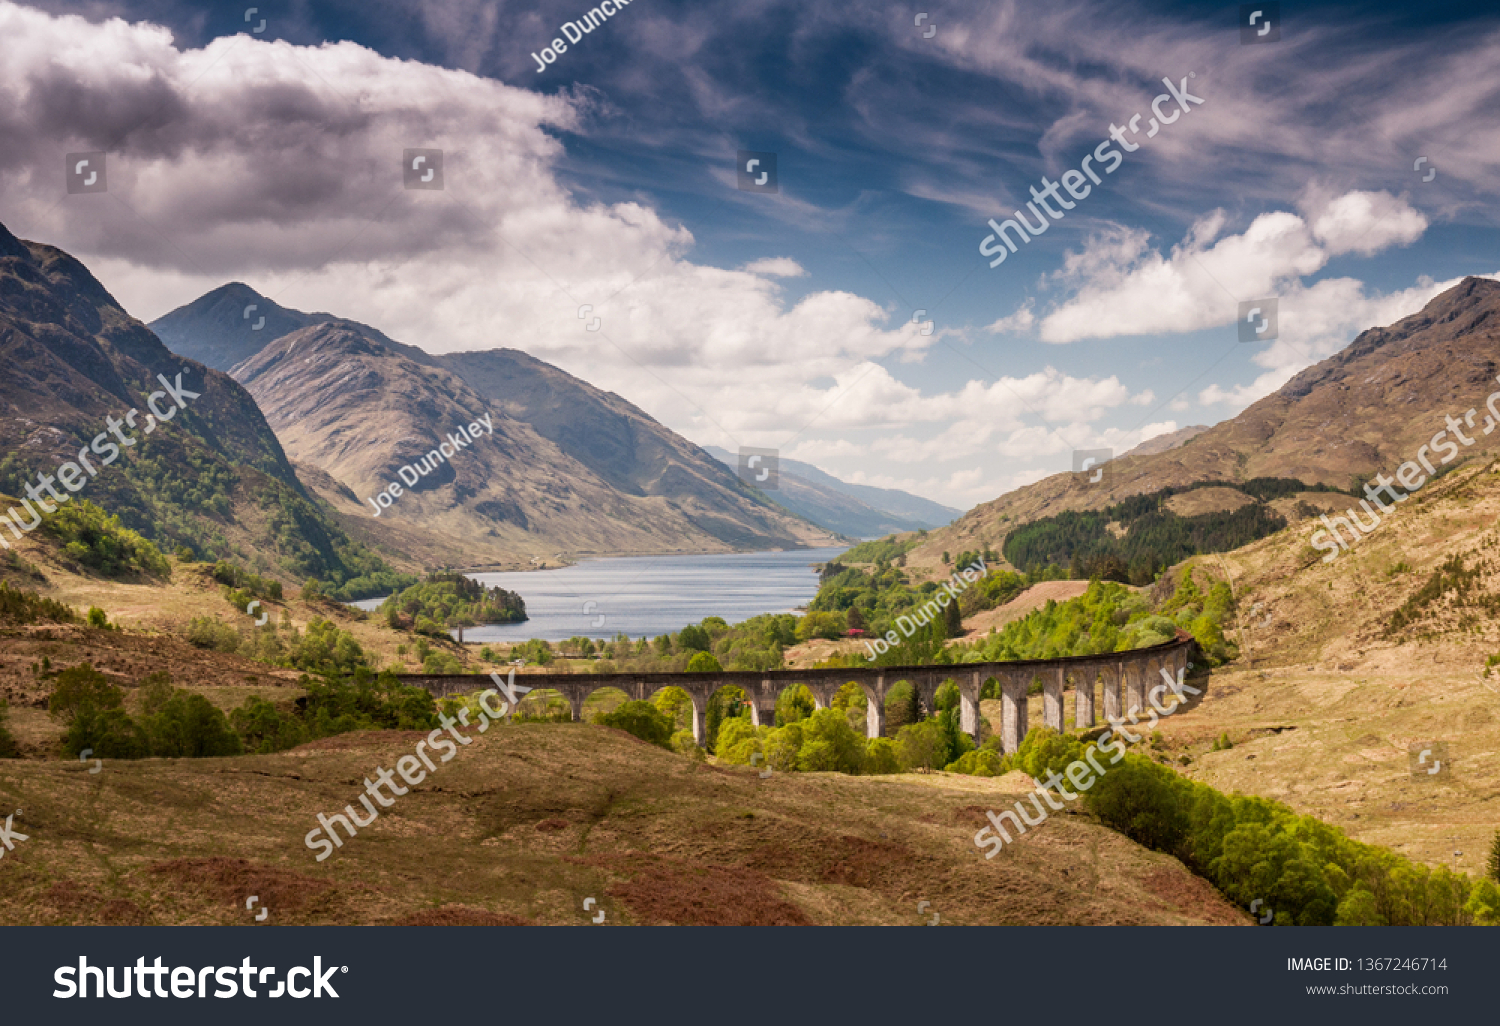 The Glenfinnan Viaduct carries the West Highland Railway Line high above Glen Finnan valley beside the lochs and mountains of Scotland. #1367246714